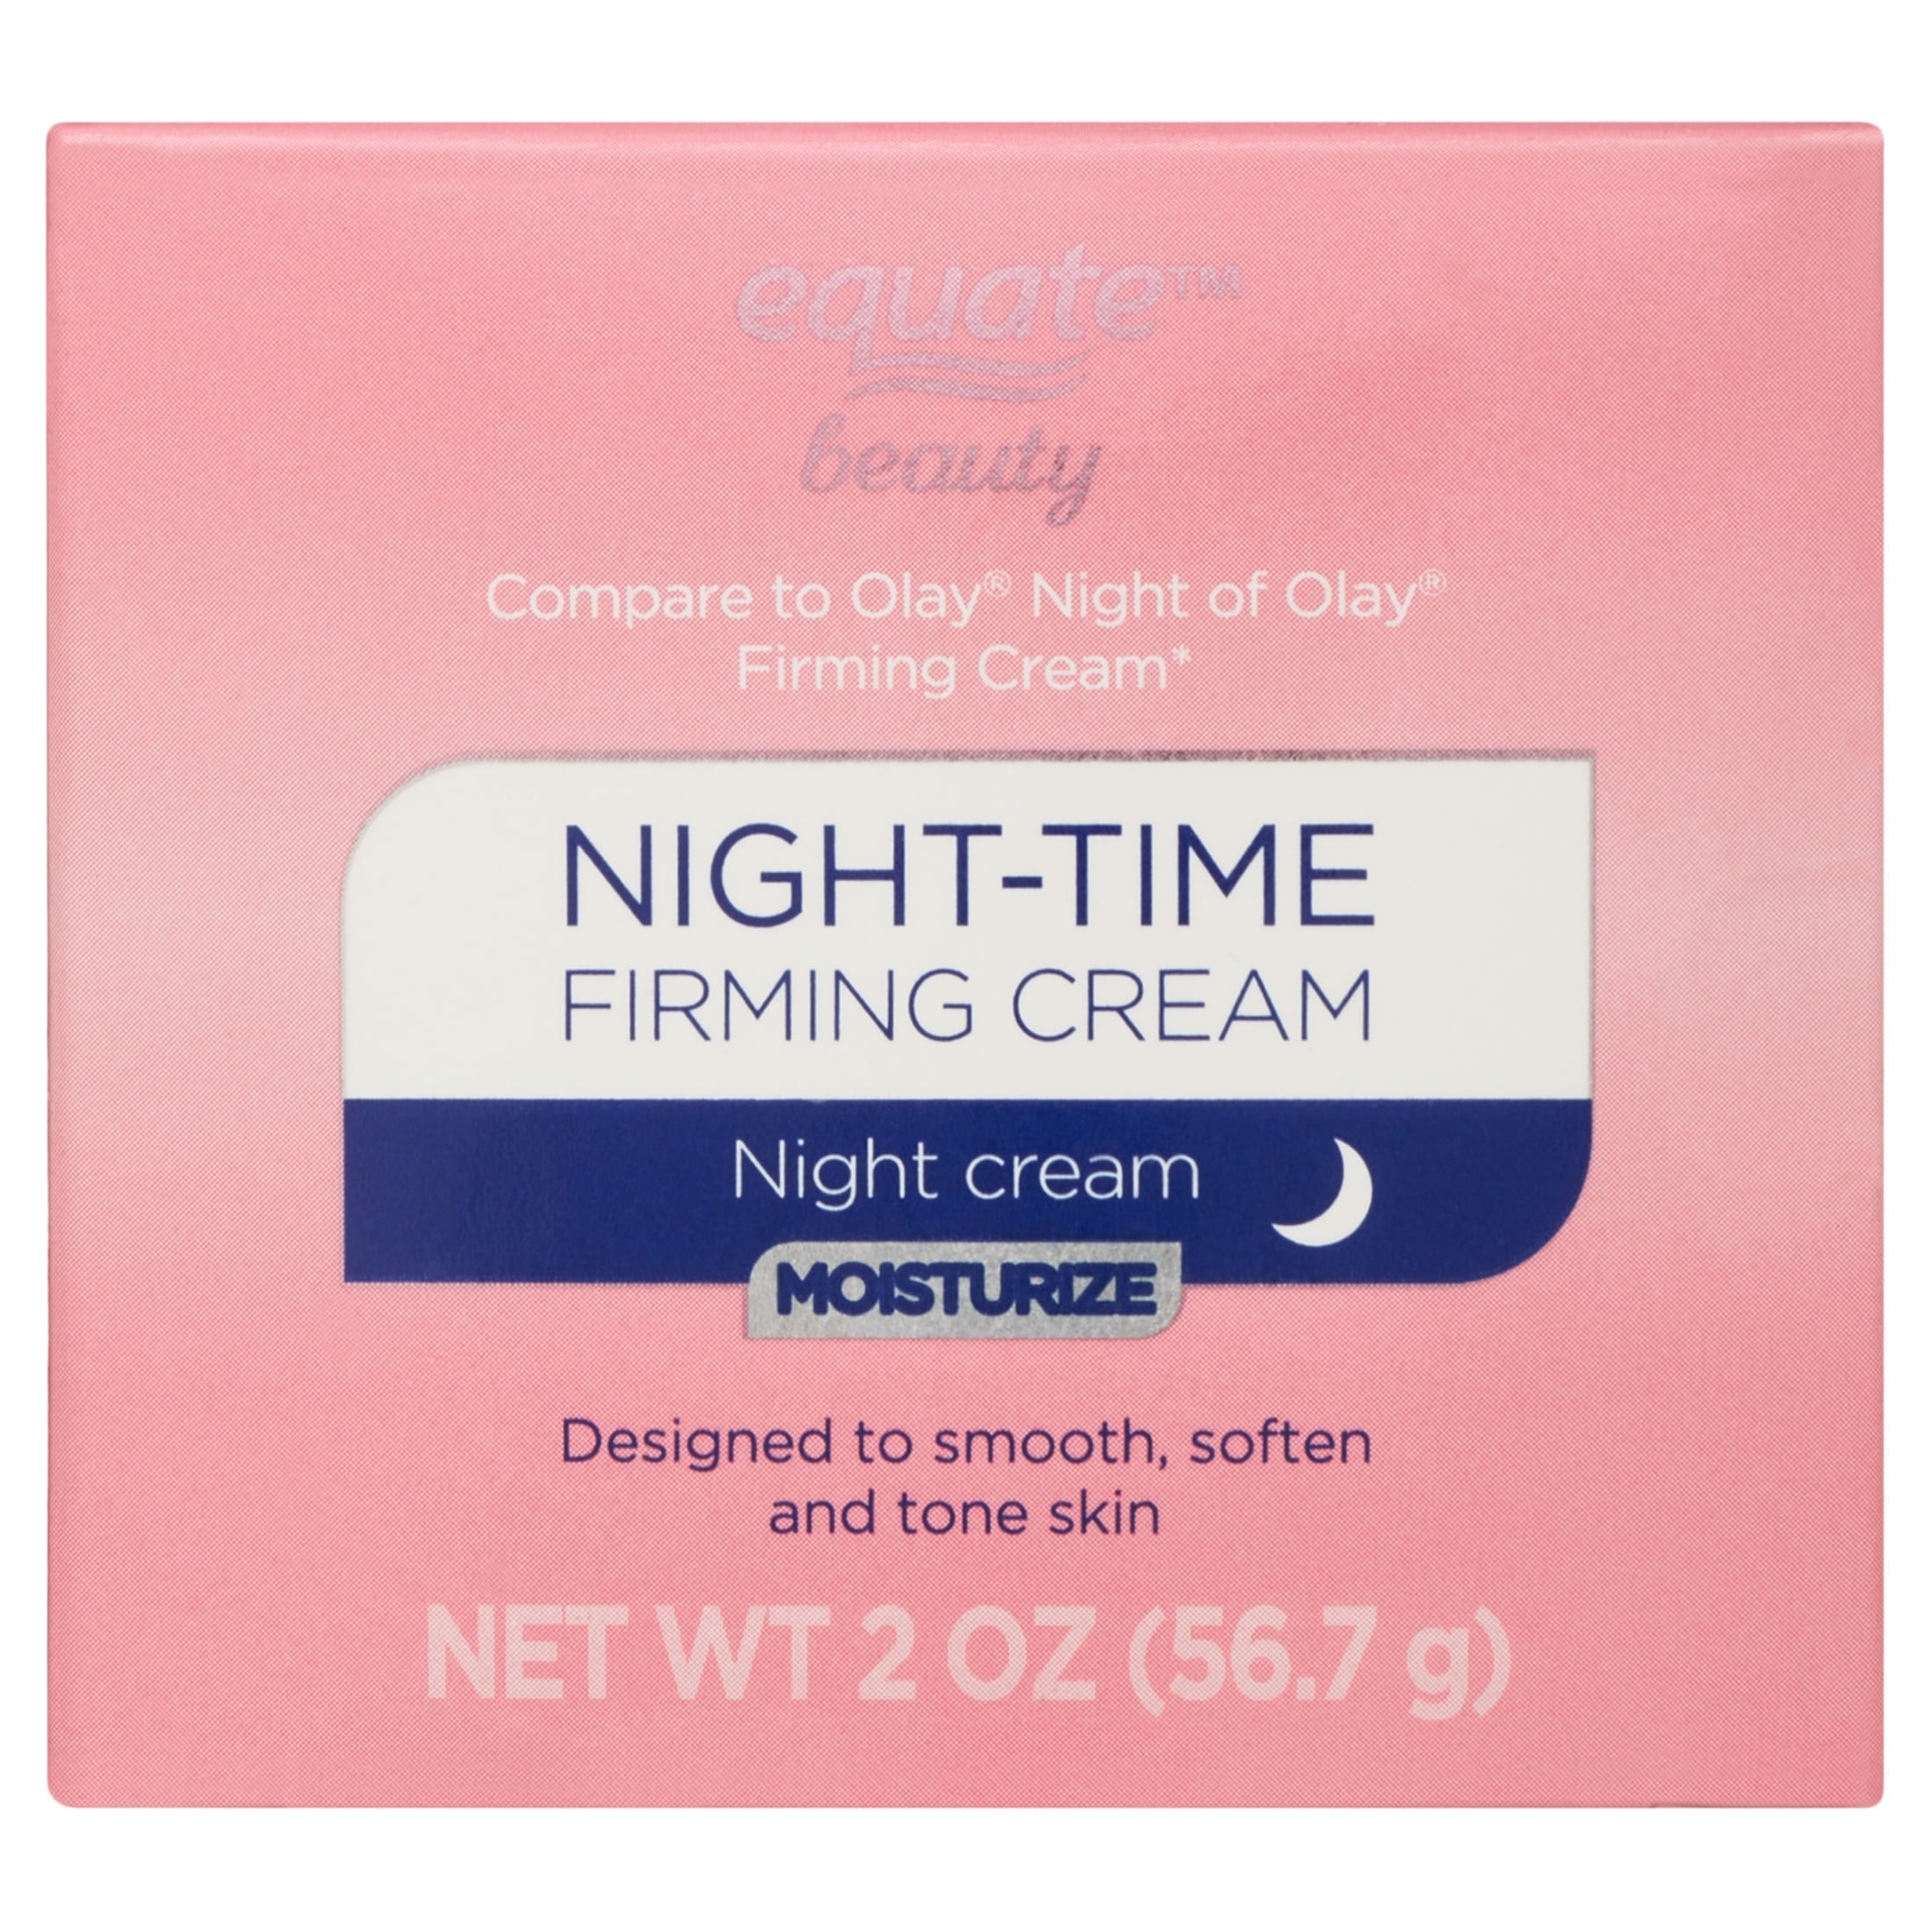 Wholesale prices with free shipping all over United States Equate Beauty Night Time Firming Moisturize Face Cream, Oil Free, 2 oz - Steven Deals